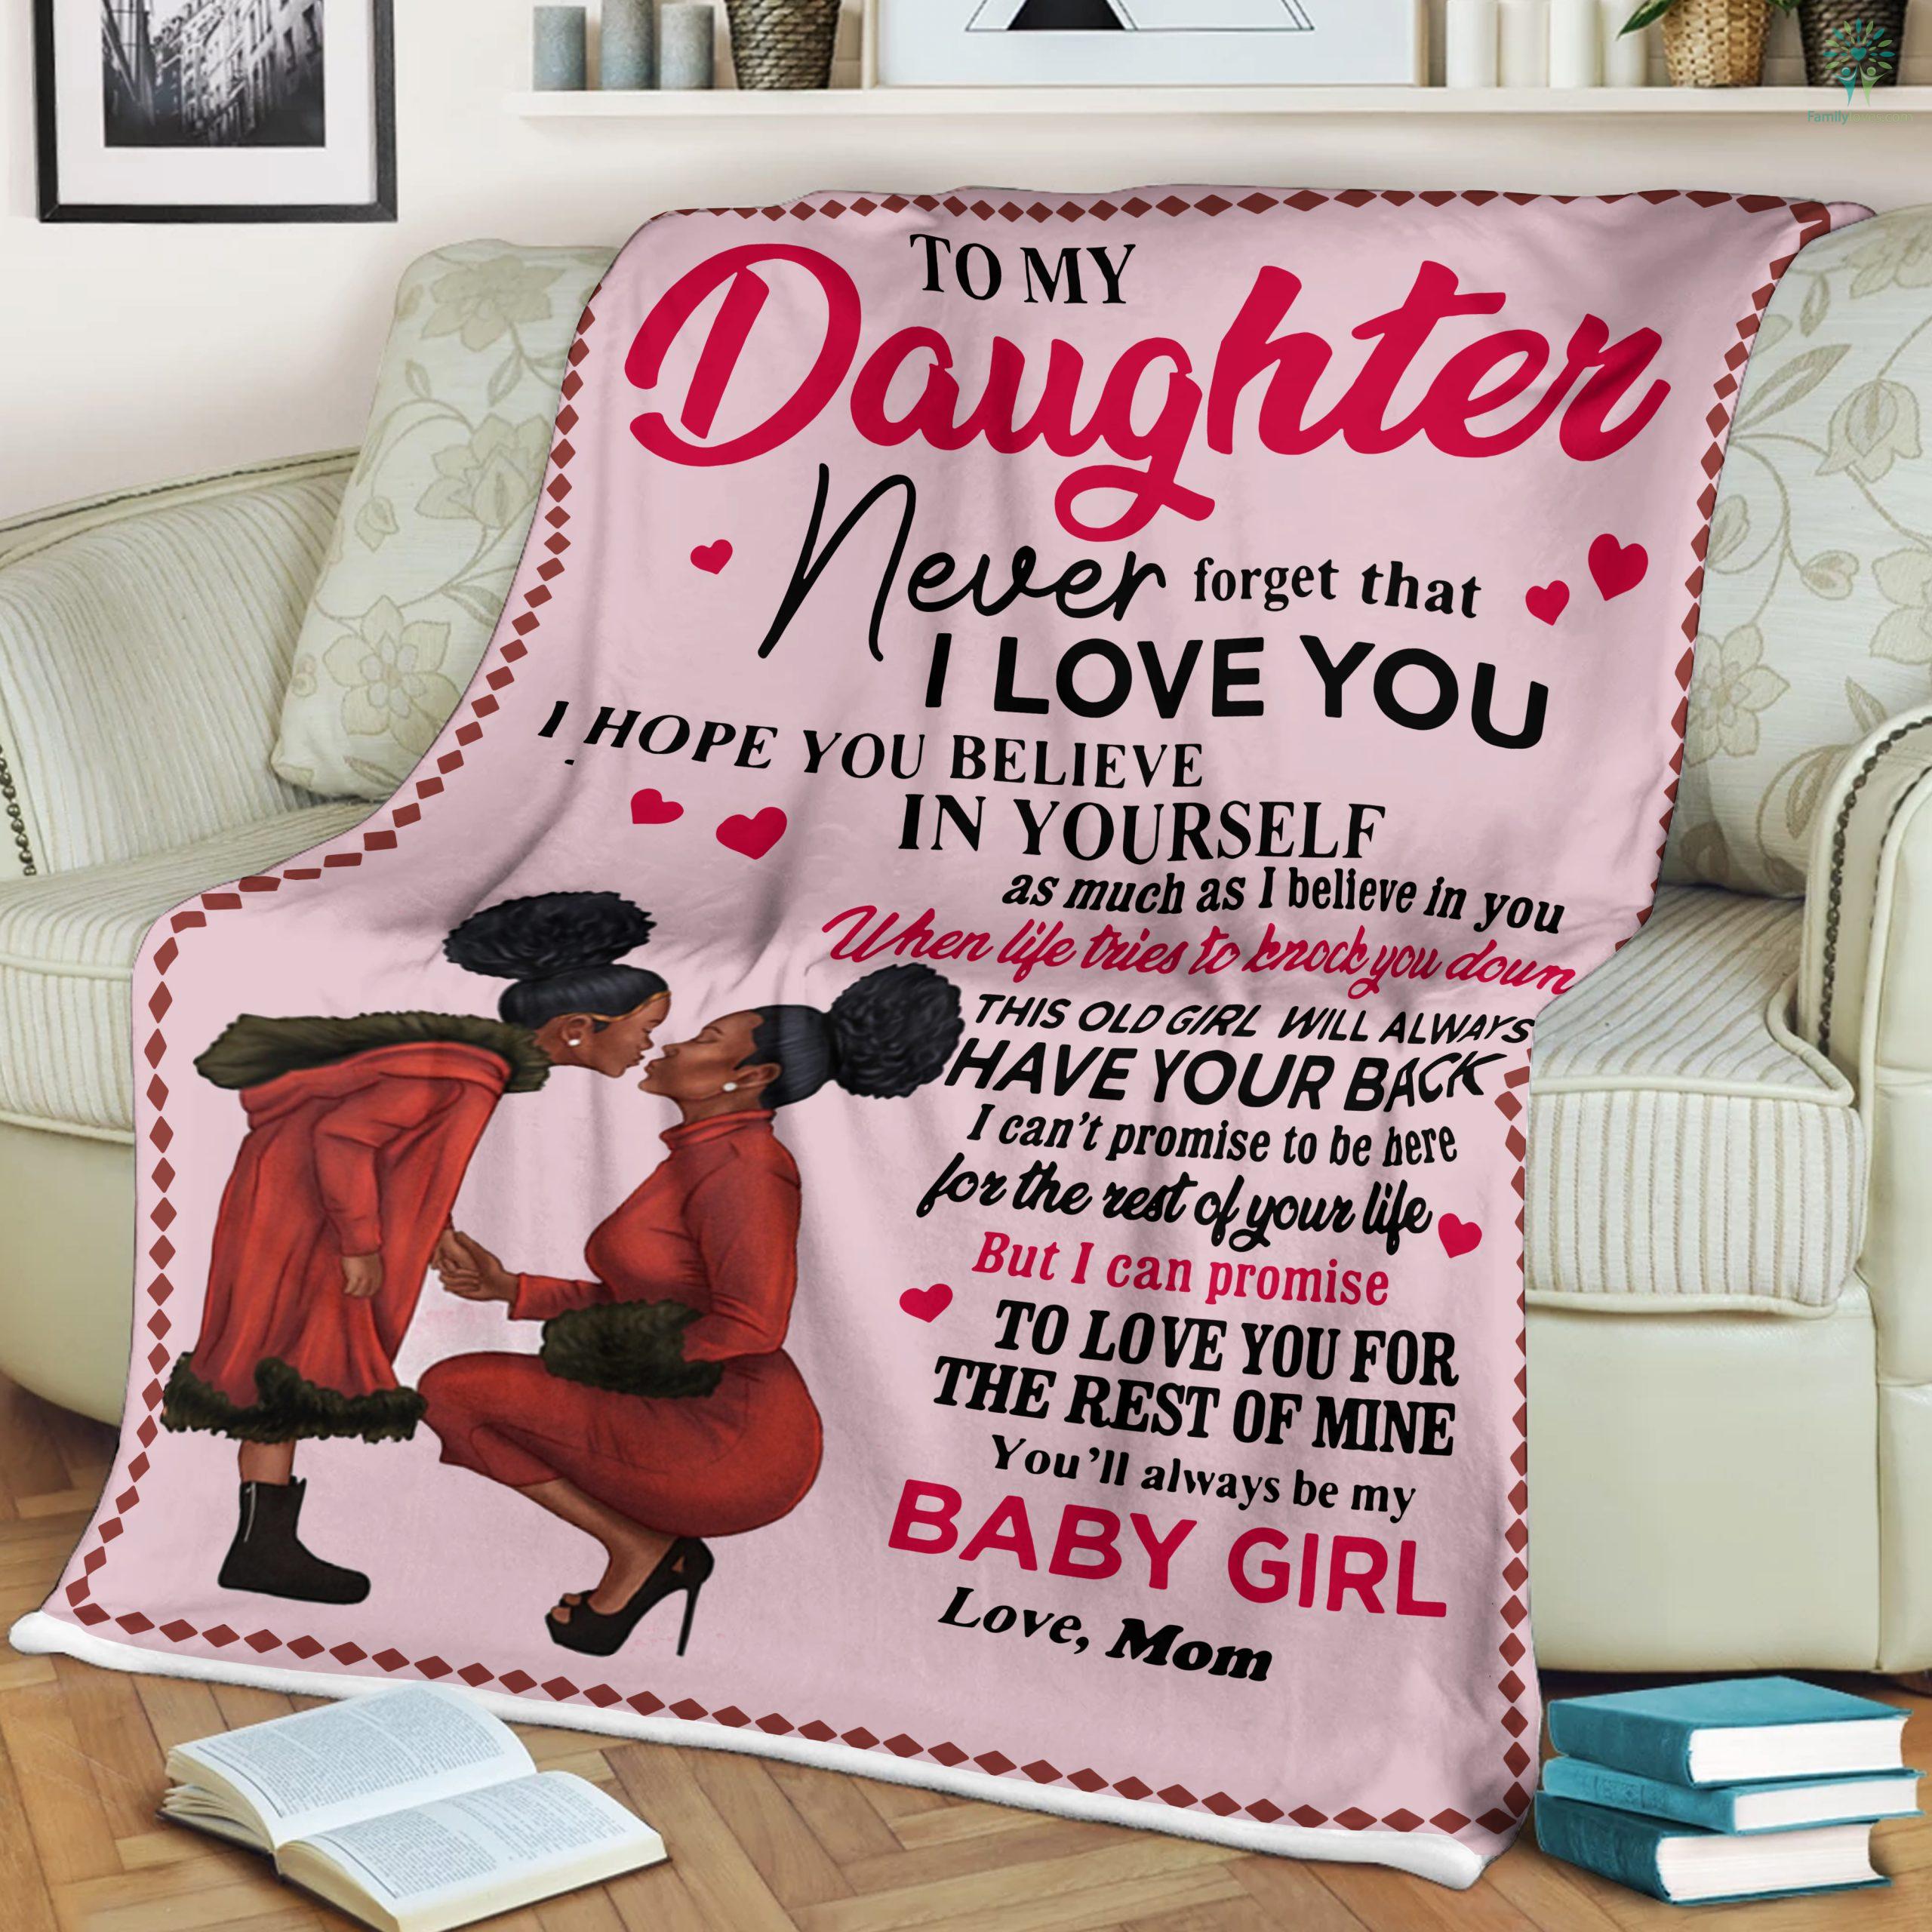 To My Daughter Never Forget That I Love You Black Baby Girl Love Mom Sherpa Fleece Blanket Familyloves Com